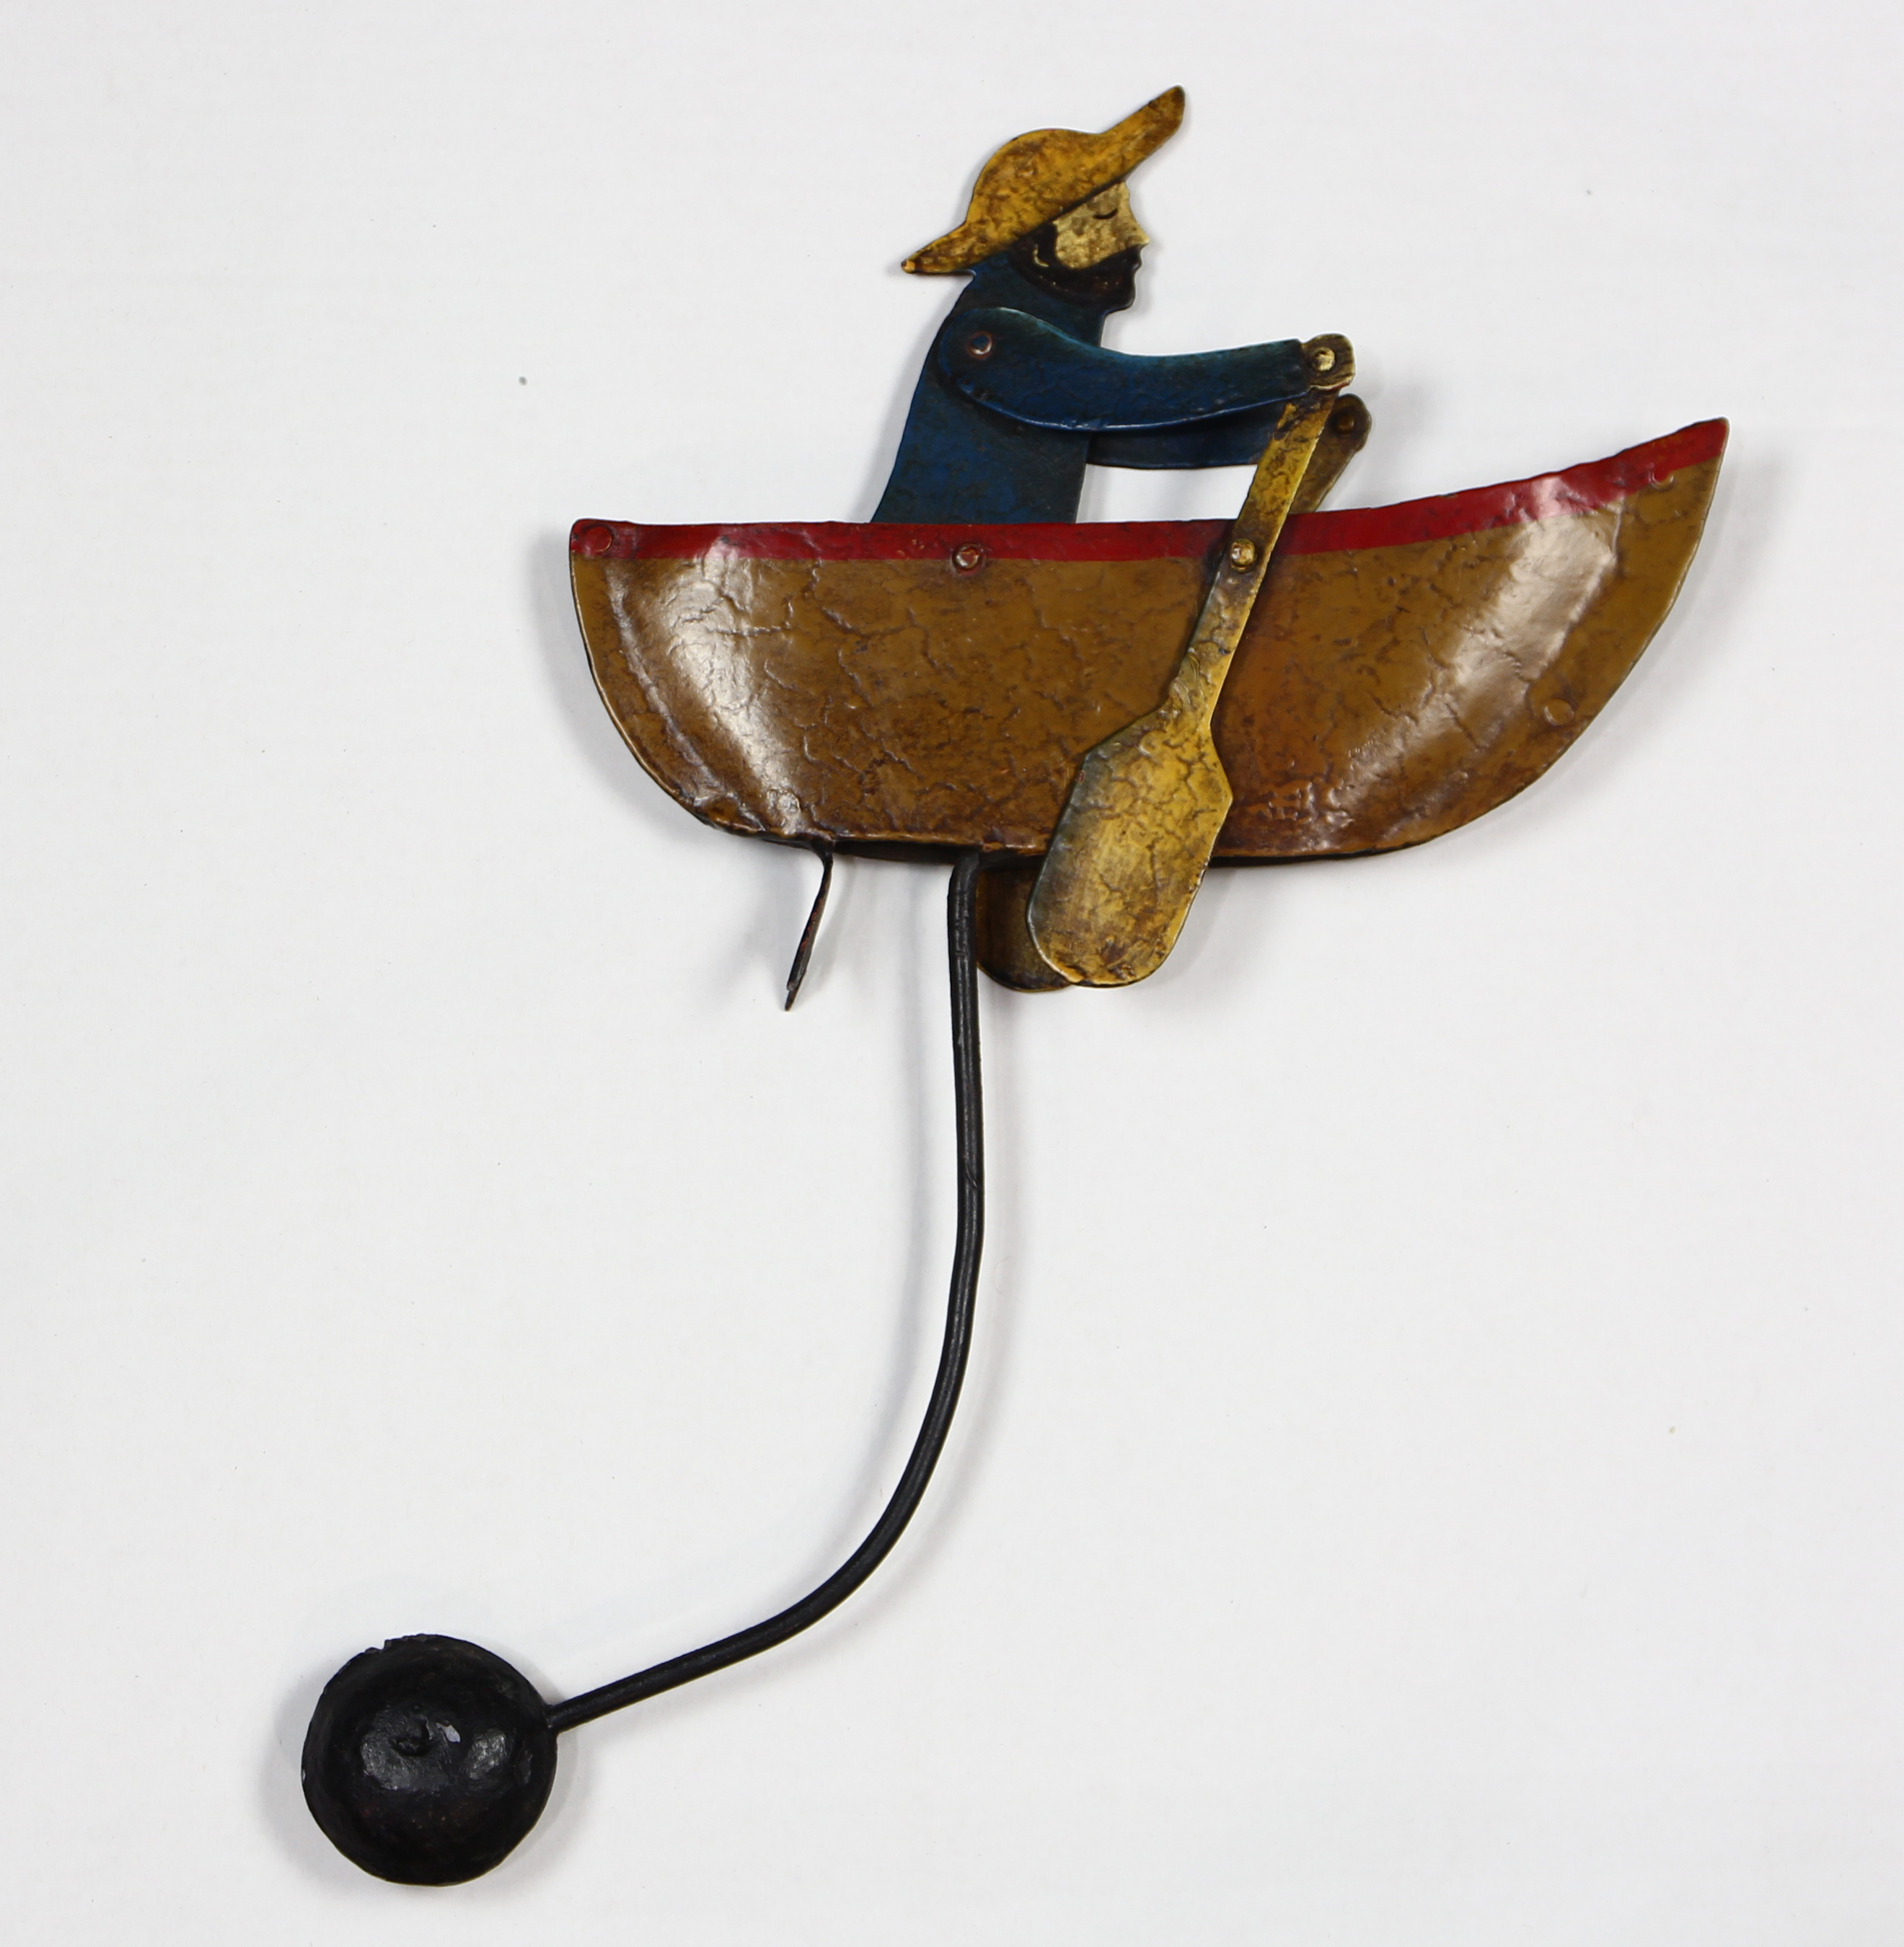 Antique wrought metal and polychrome decorated whirligig, depicting a sailor rowing his boat, 14.5"h